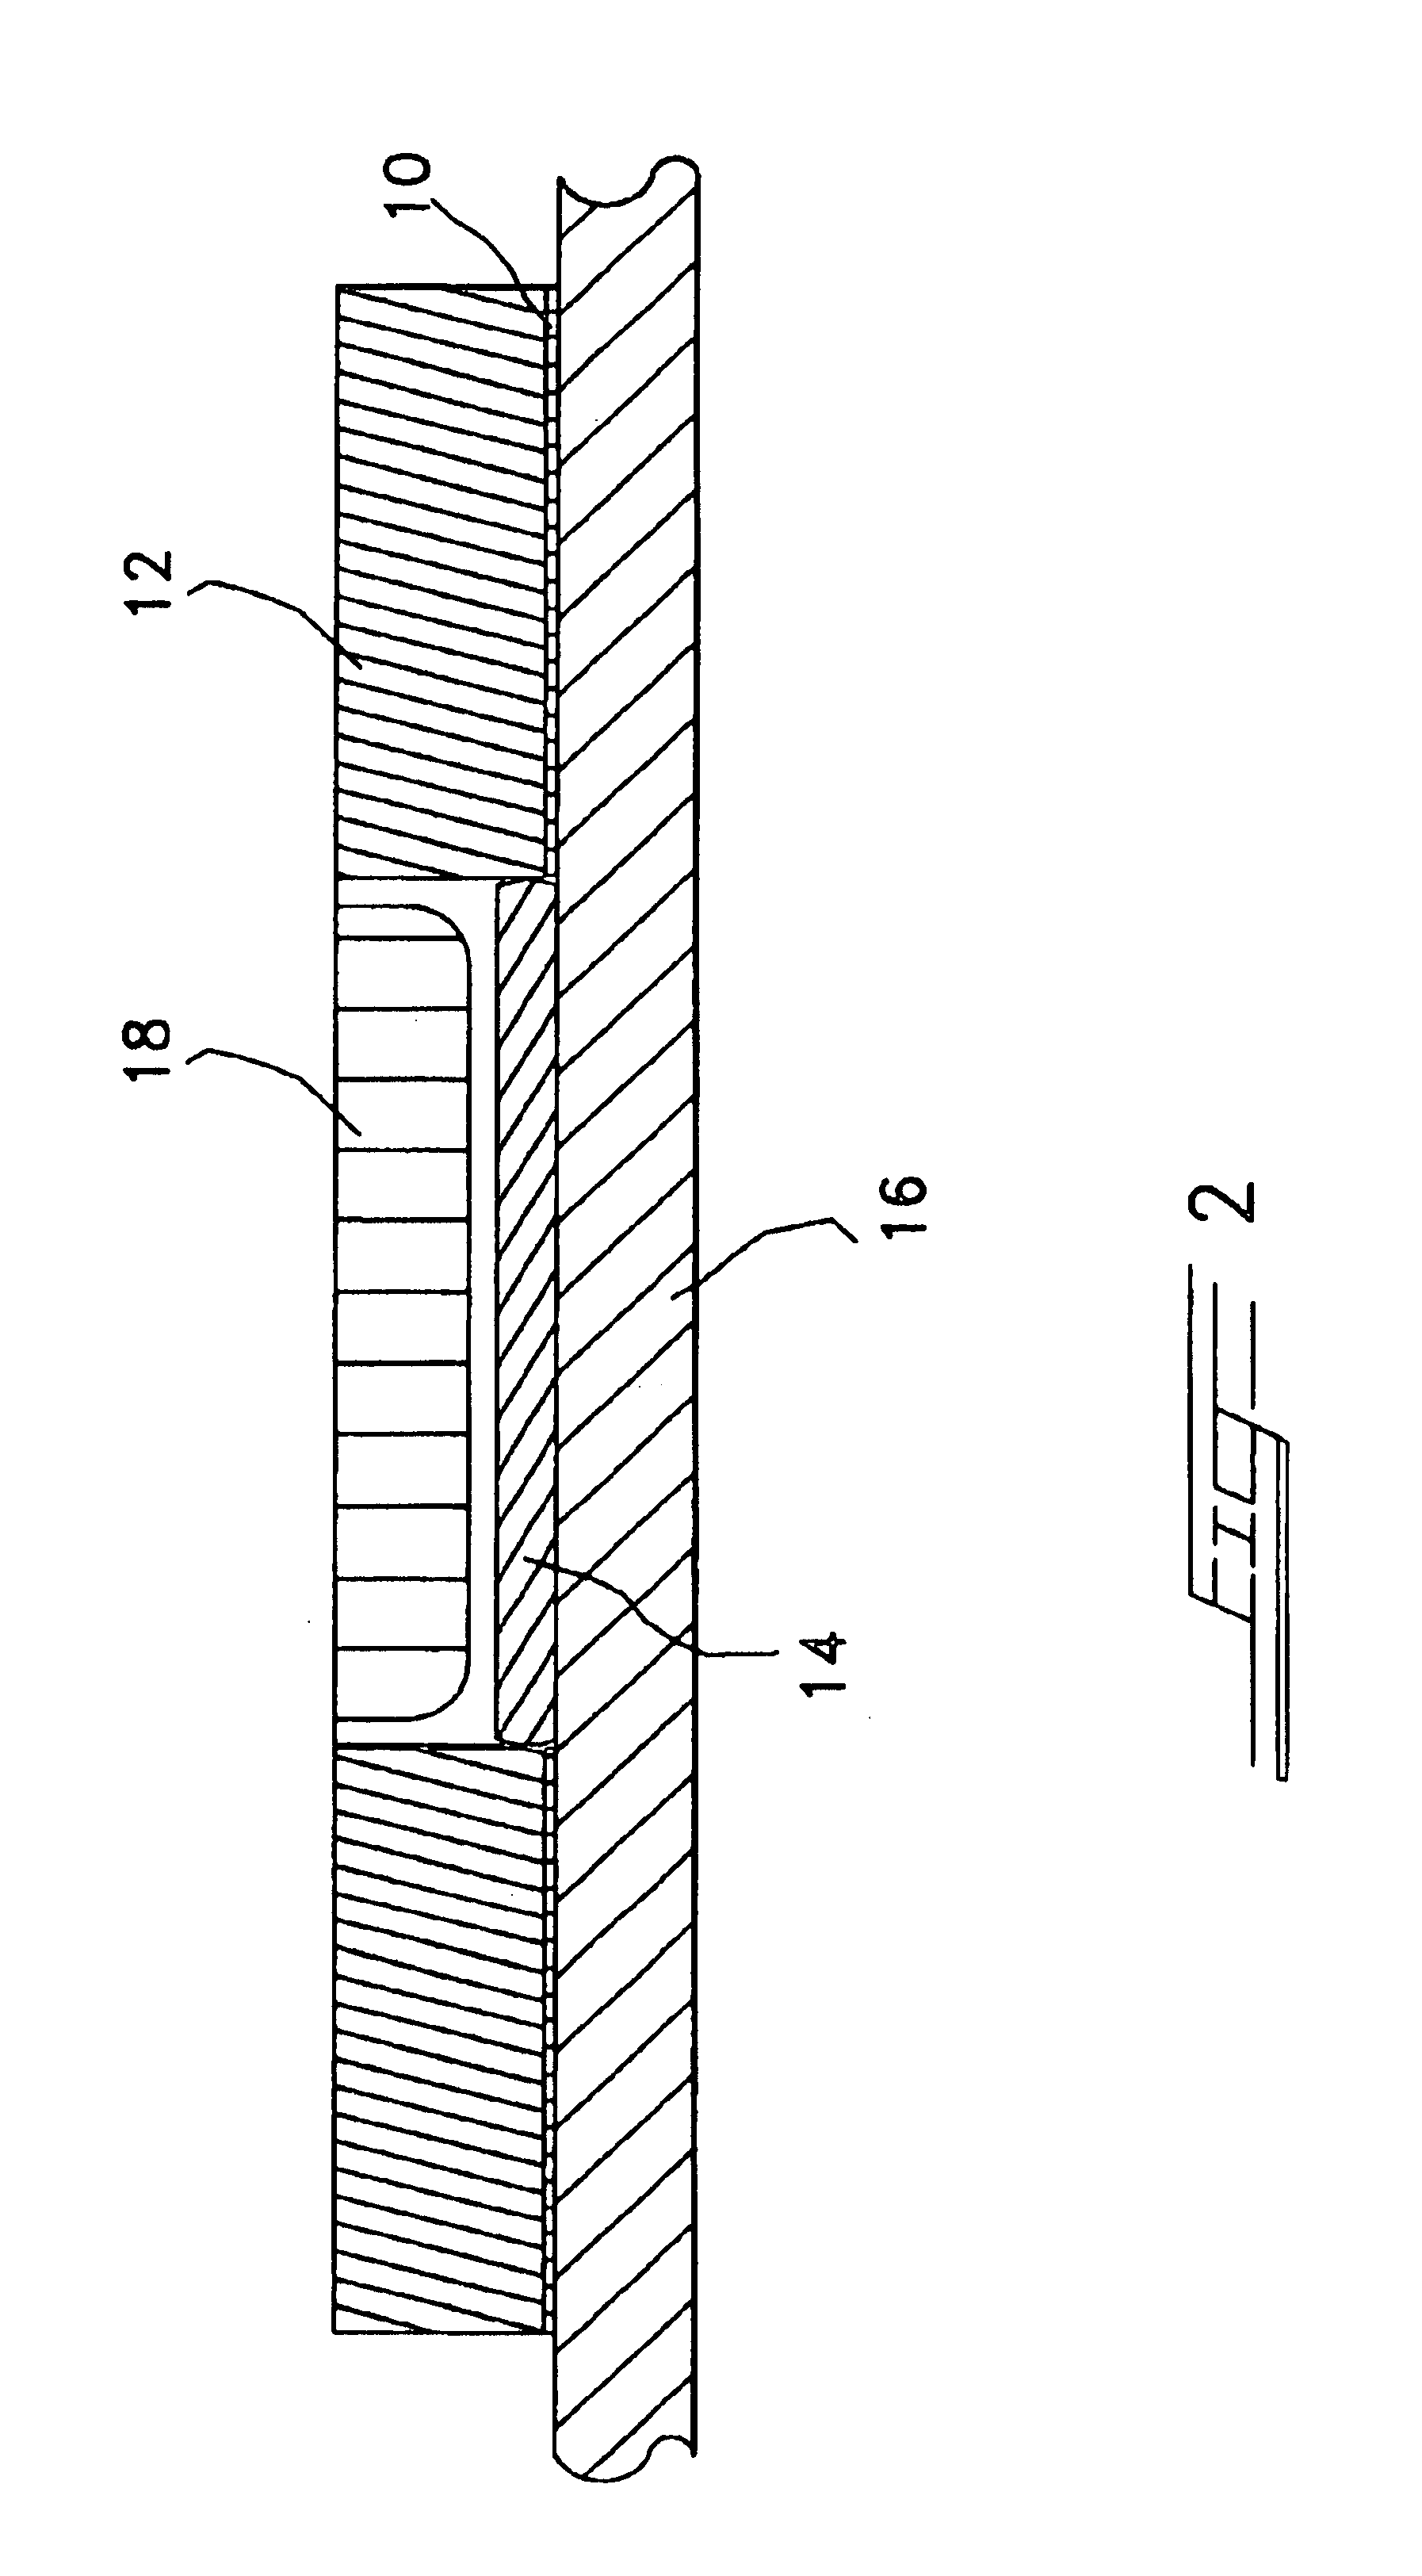 Retaining ring with wear pad for use in chemical mechanical planarization